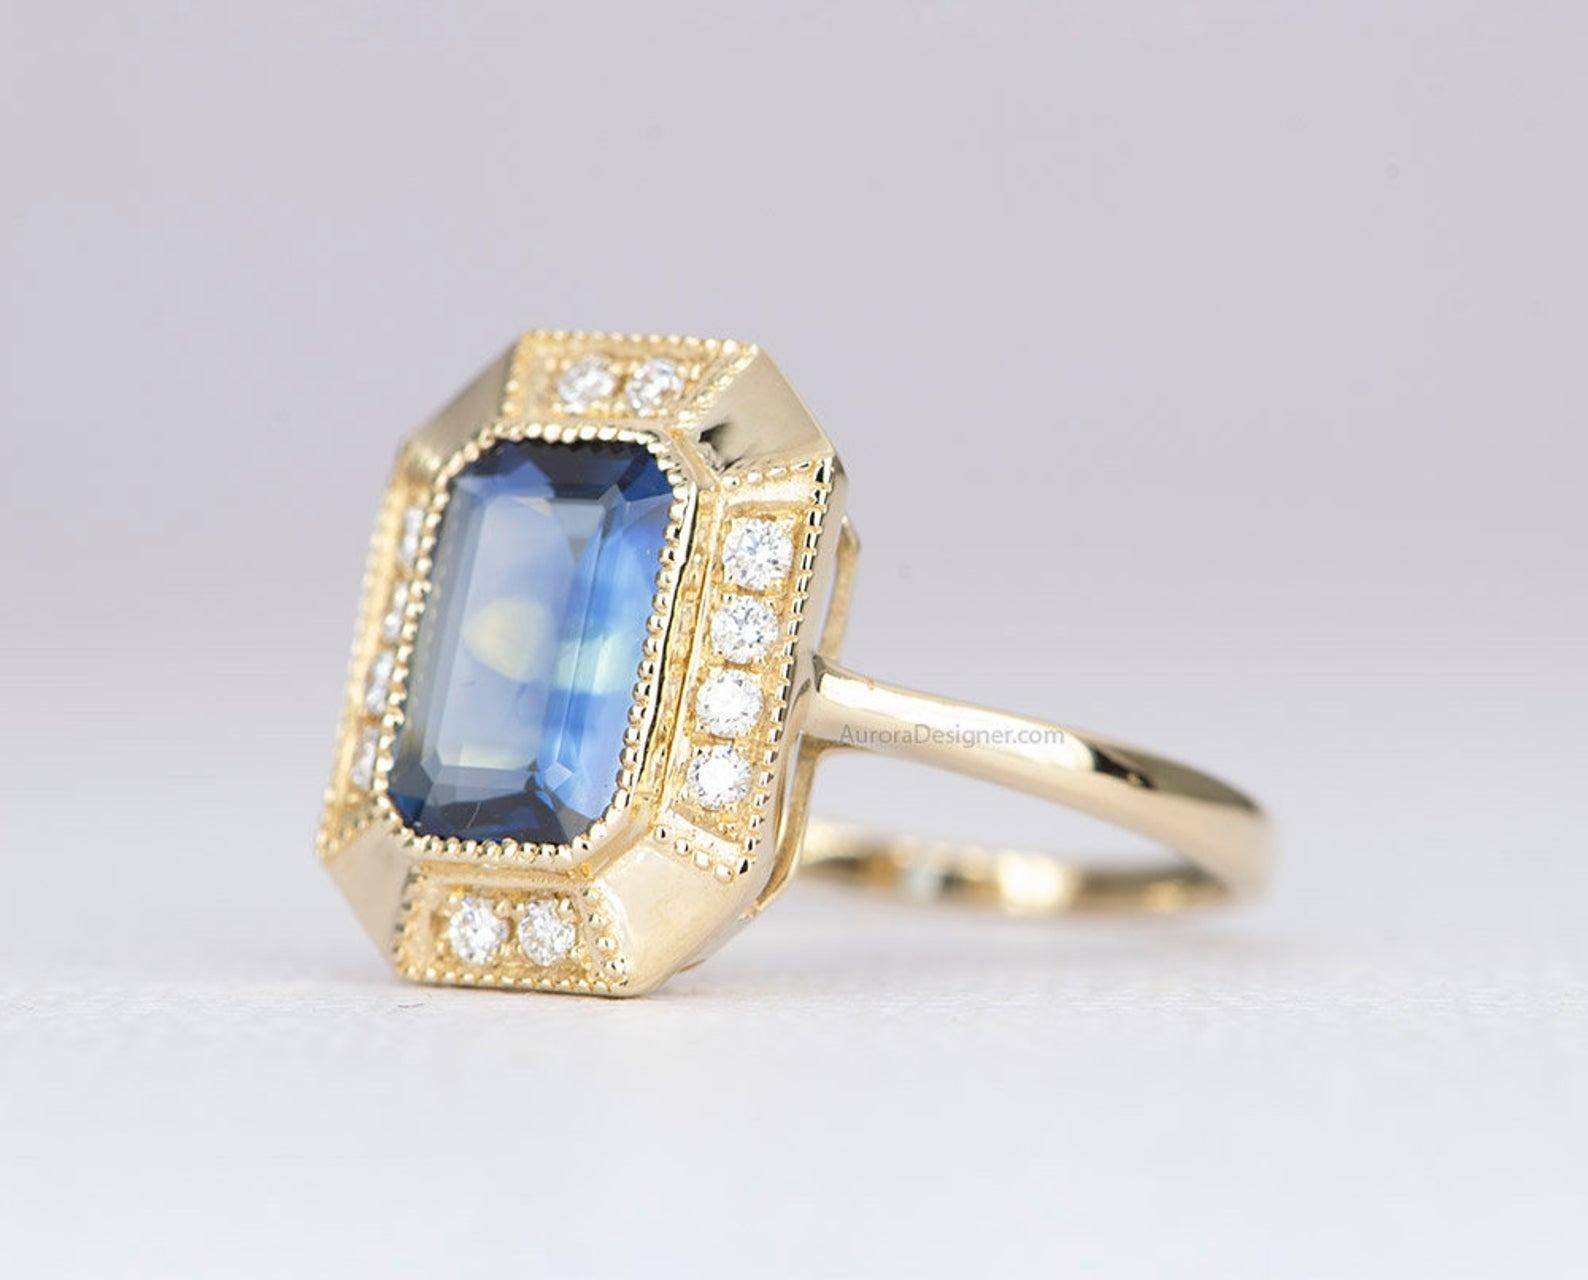 2.25 Carat Emerald Cut Teal Blue Sapphire 14 Karat Gold Diamond Halo Ring AD1813 In New Condition For Sale In Osprey, FL